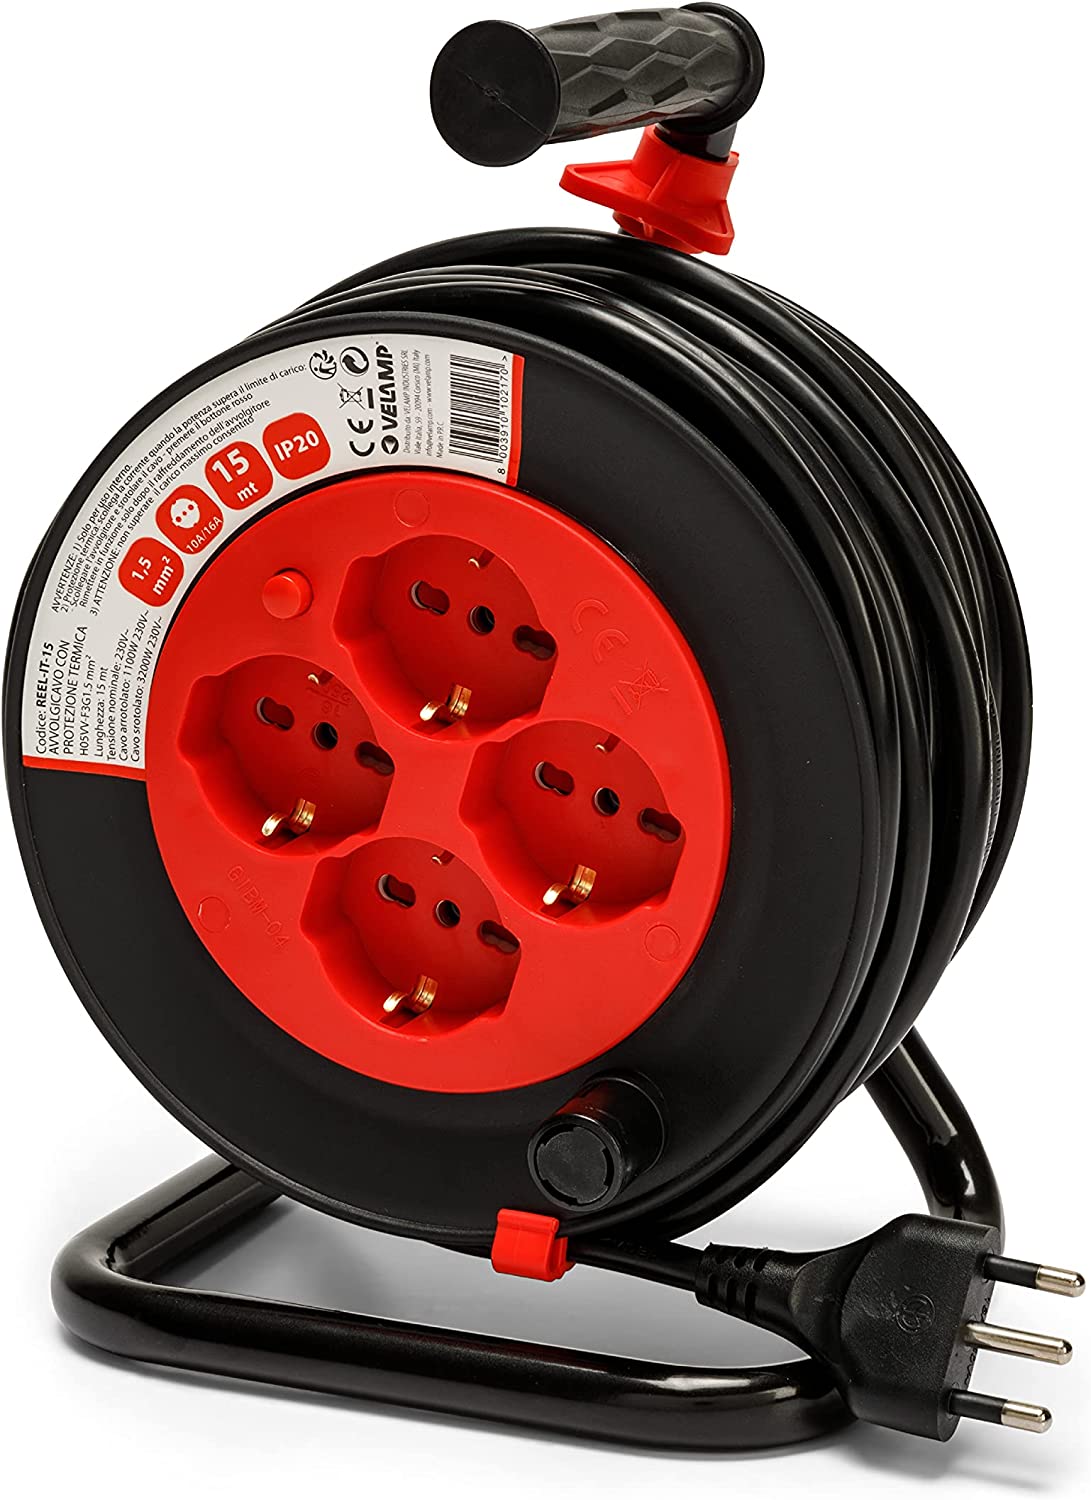 VELAMP REEL-IT-25 Electric Extension with Cable Reel, Black/Red, 25 Meters 